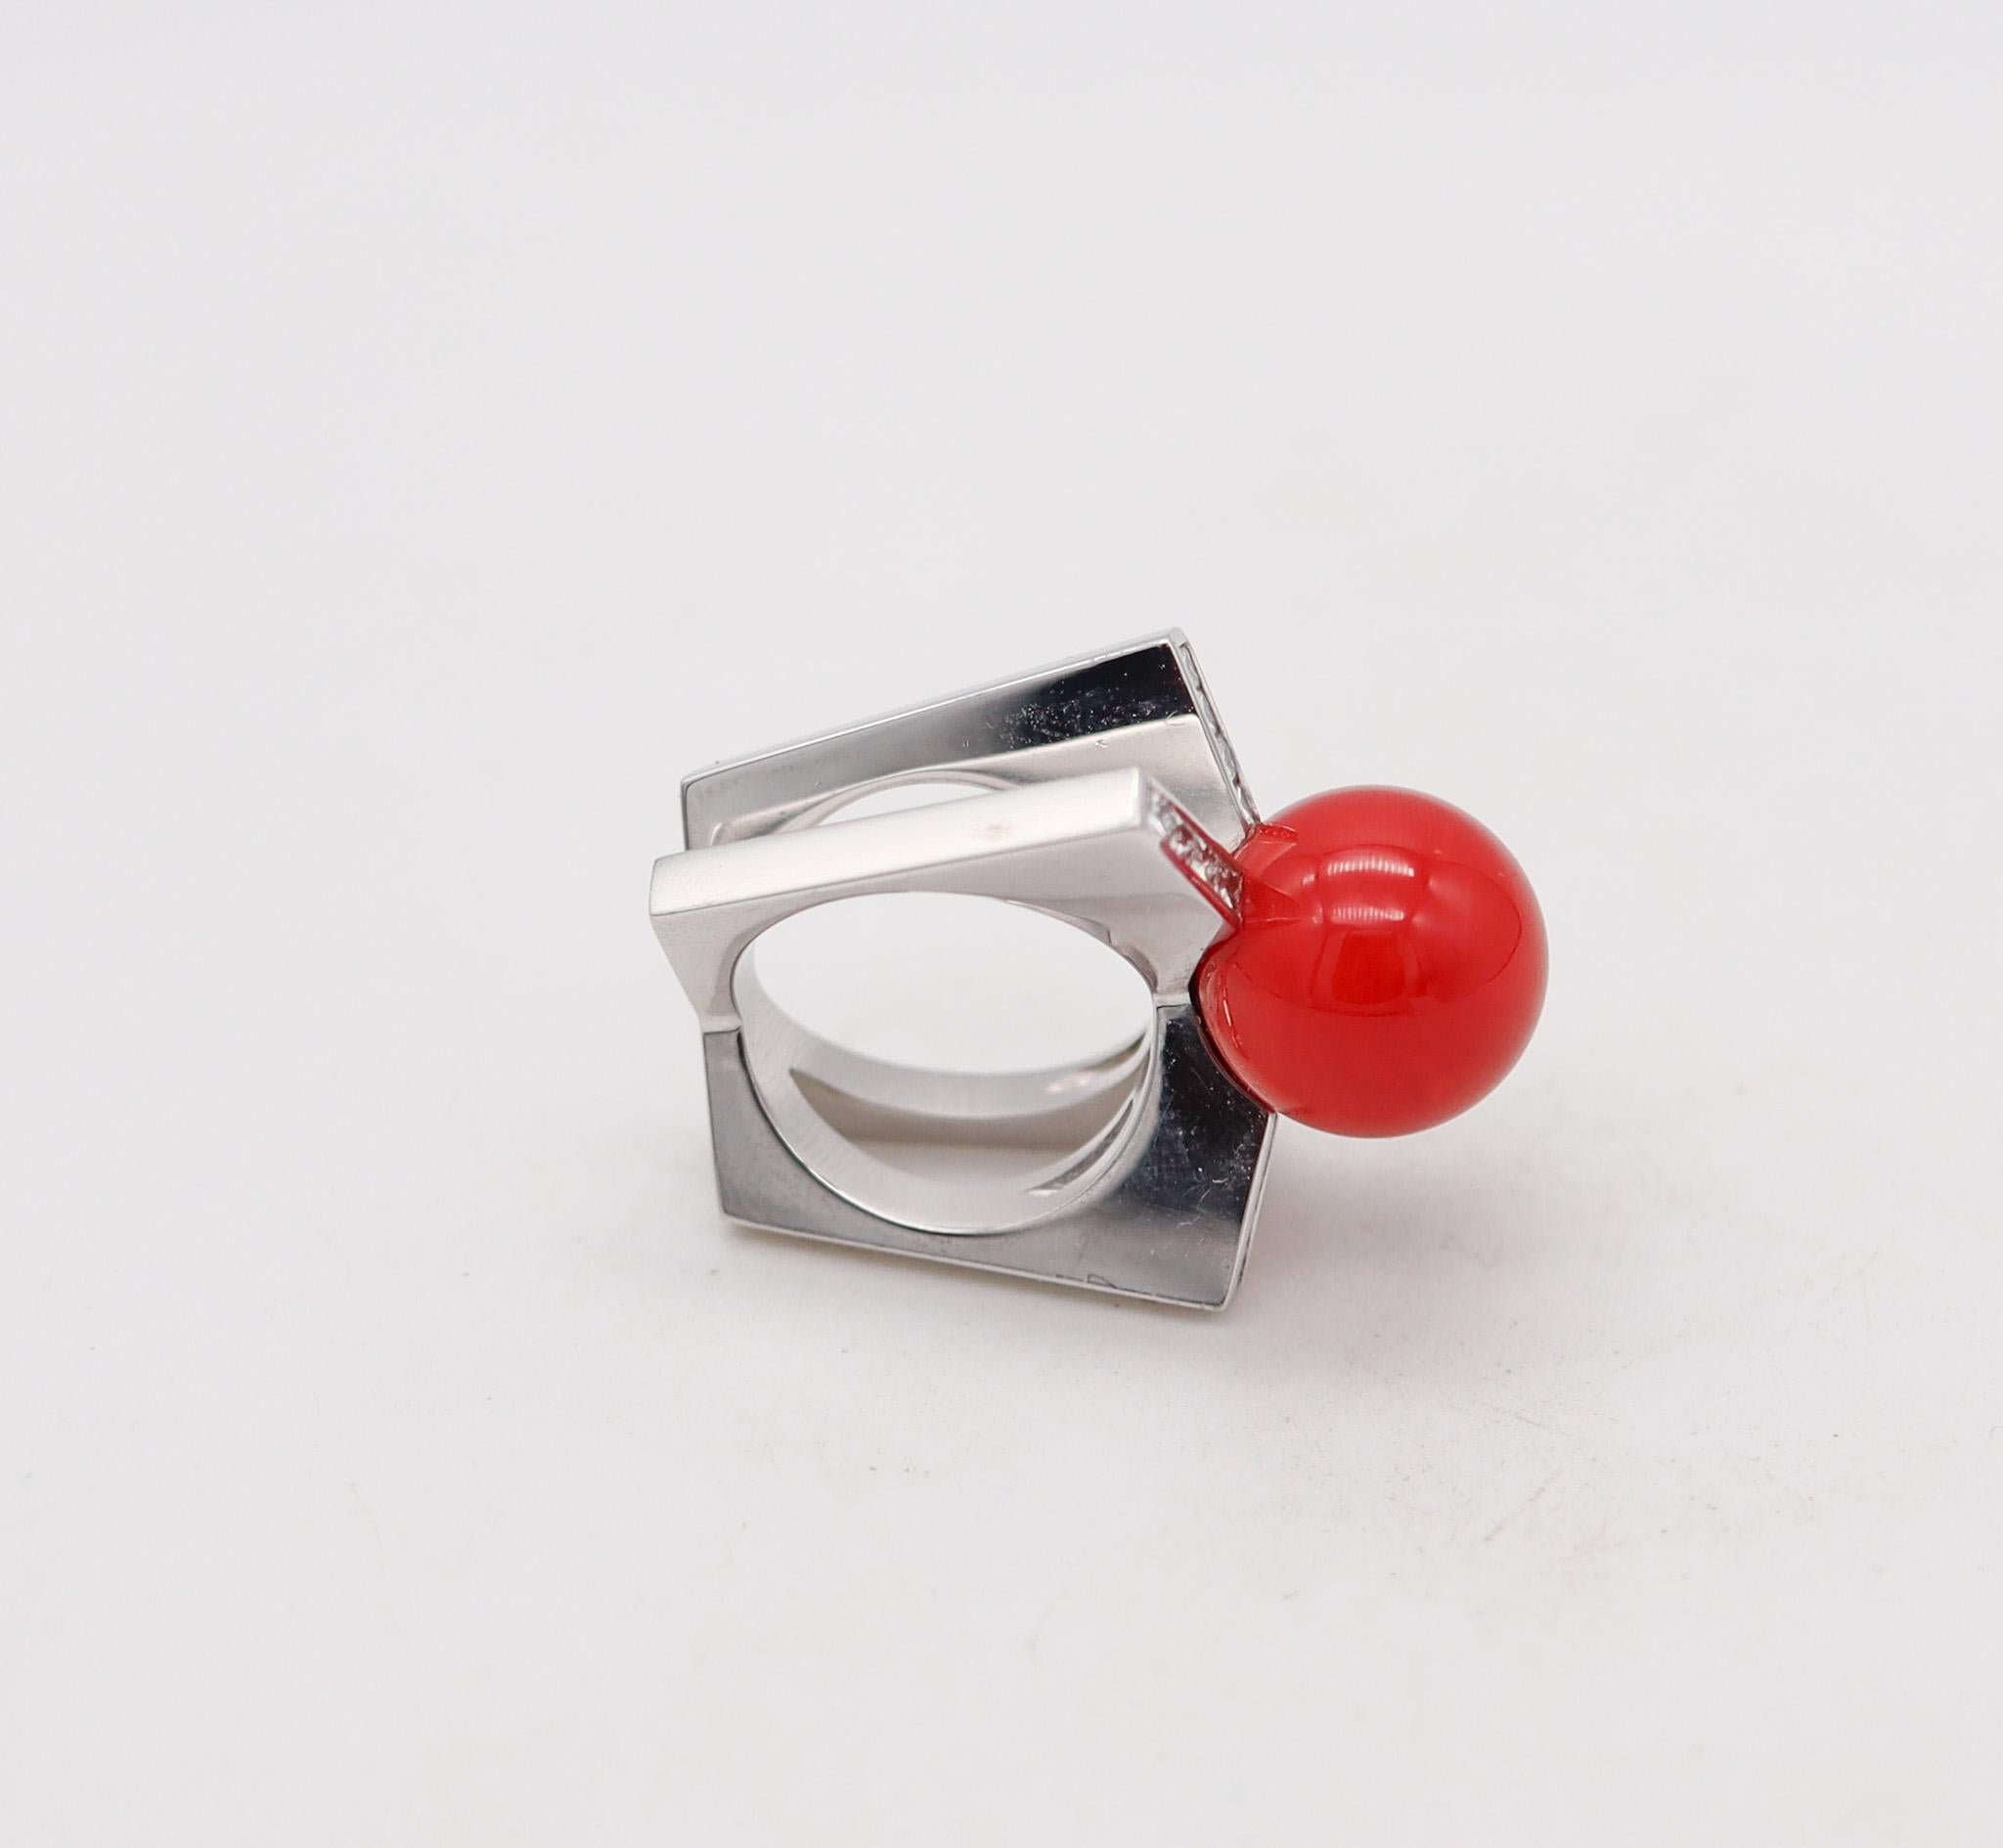 Sculptural cocktail ring with Italian Sardinian coral.

Magnificent cocktail ring, created in Italy in the late 20th century, back in the 1990. This ultra modern ring mix the classic with the contemporaneous and was carefully crafted with sculptural